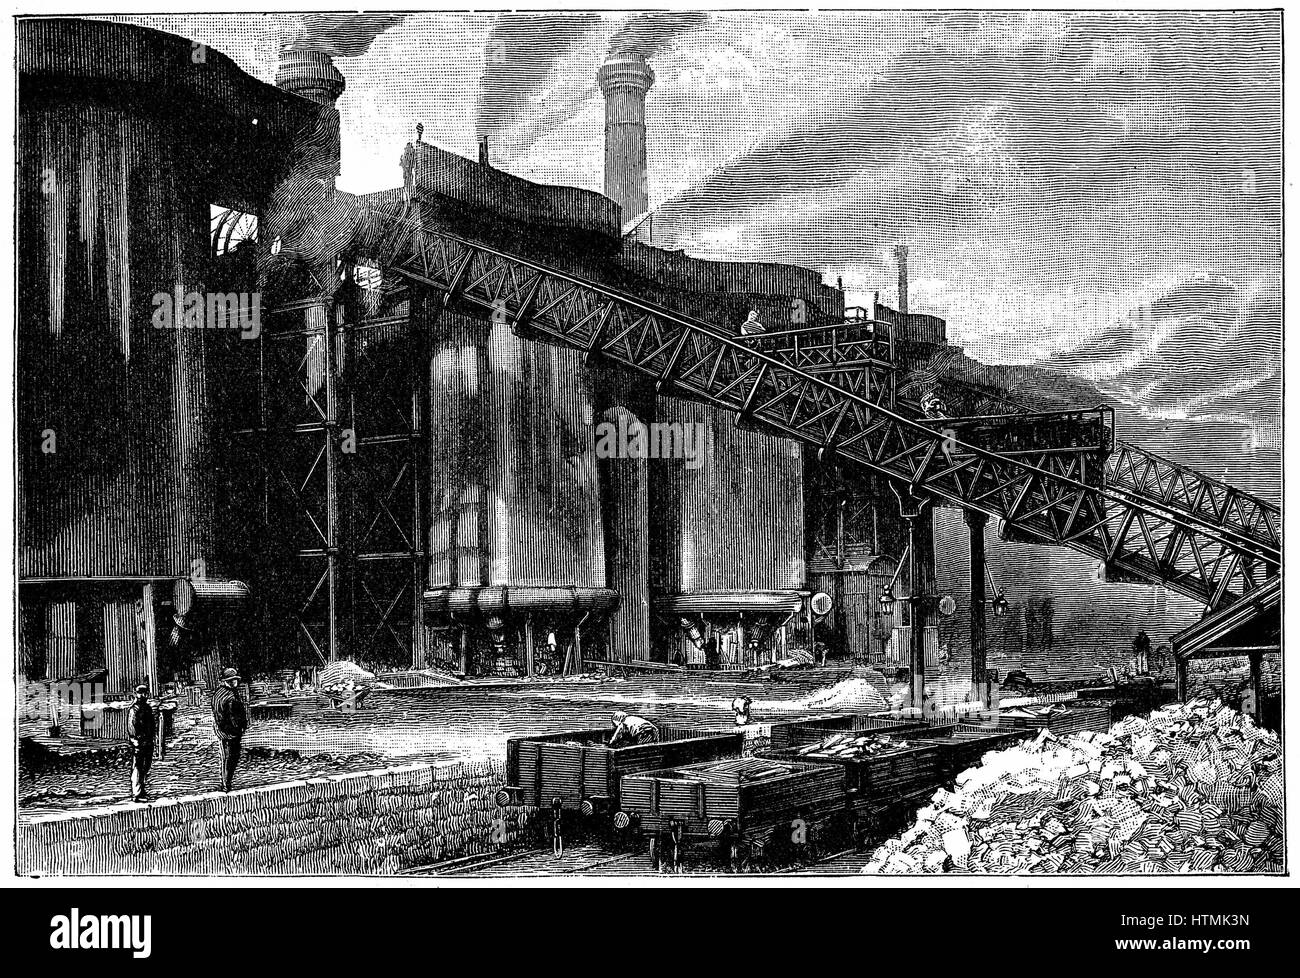 Blast furnaces, Barrow Haematite Iron and Steel Company, Barrow in Furness, Lancashire (Cumbria). Charge being taken to top of furnace on railway. In foreground are railway trucks transporting ore and fuel. Wood engraving 1890 Stock Photo